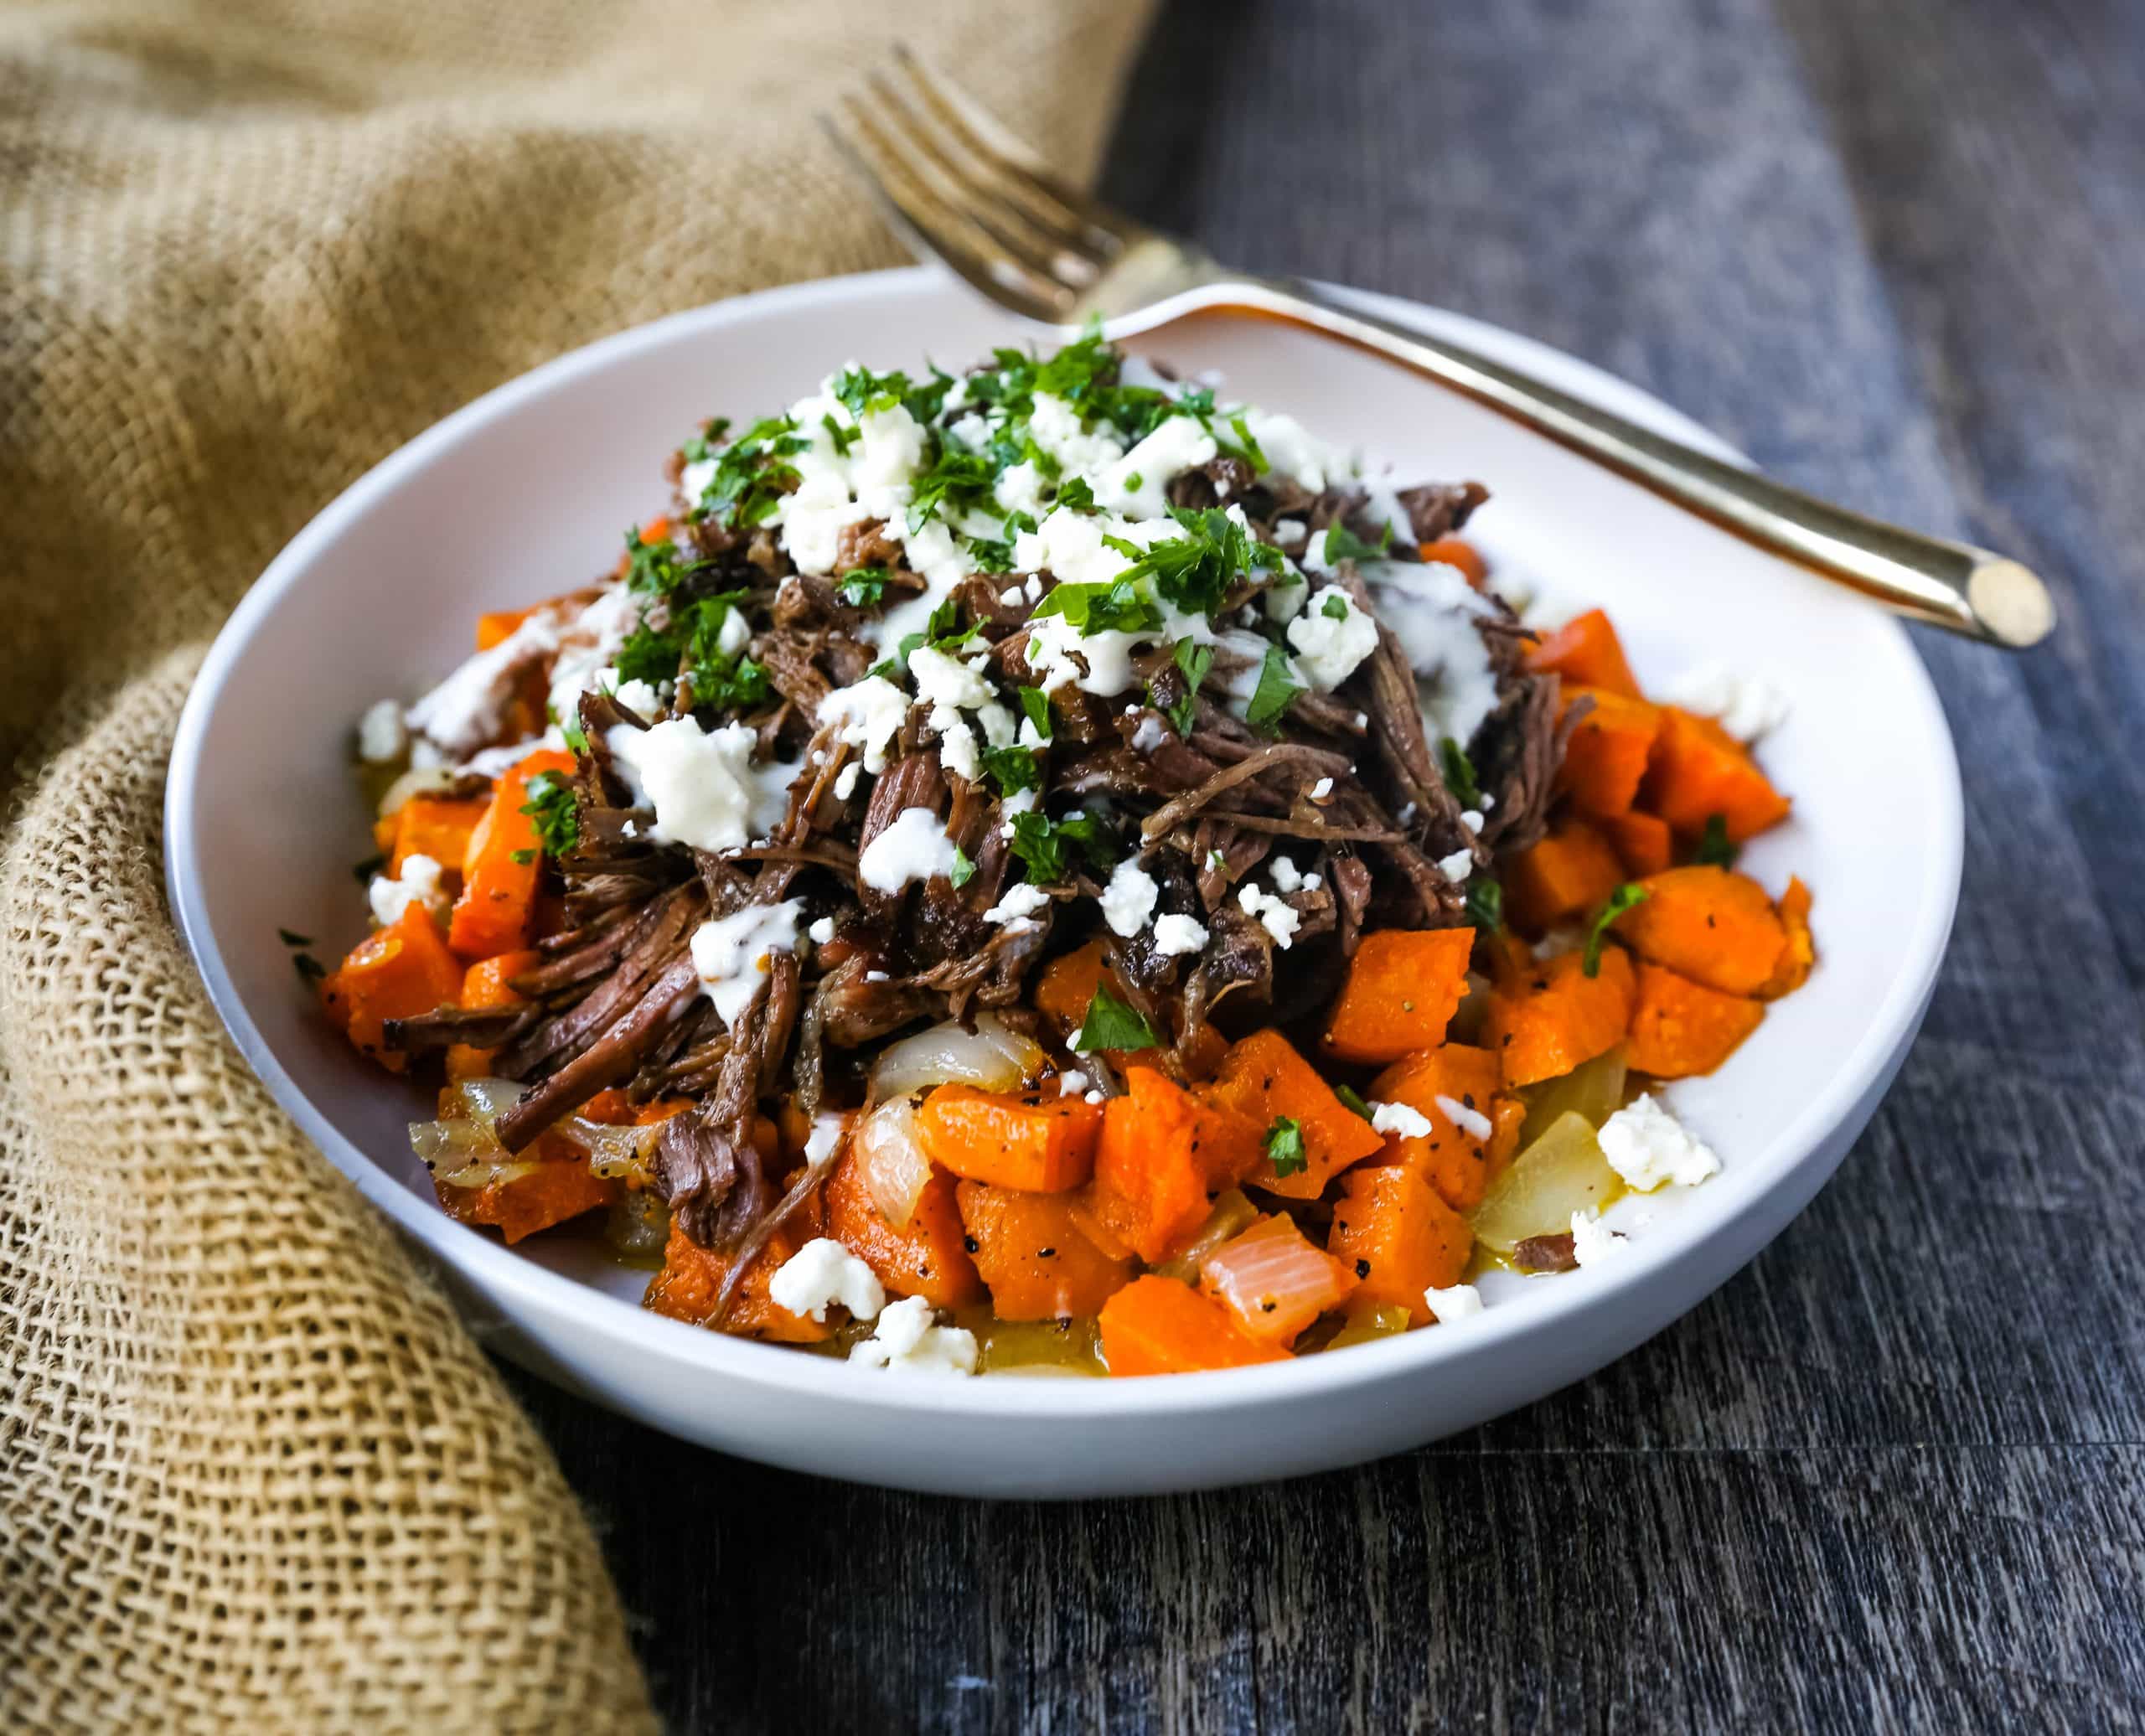 Braised Beef and Sweet Potato Hash Bowl. Tender braised beef on top of a sweet potato onion hash and topped with feta cheese and herbs. www.modernhoney.com #bowl #bowls #dinner